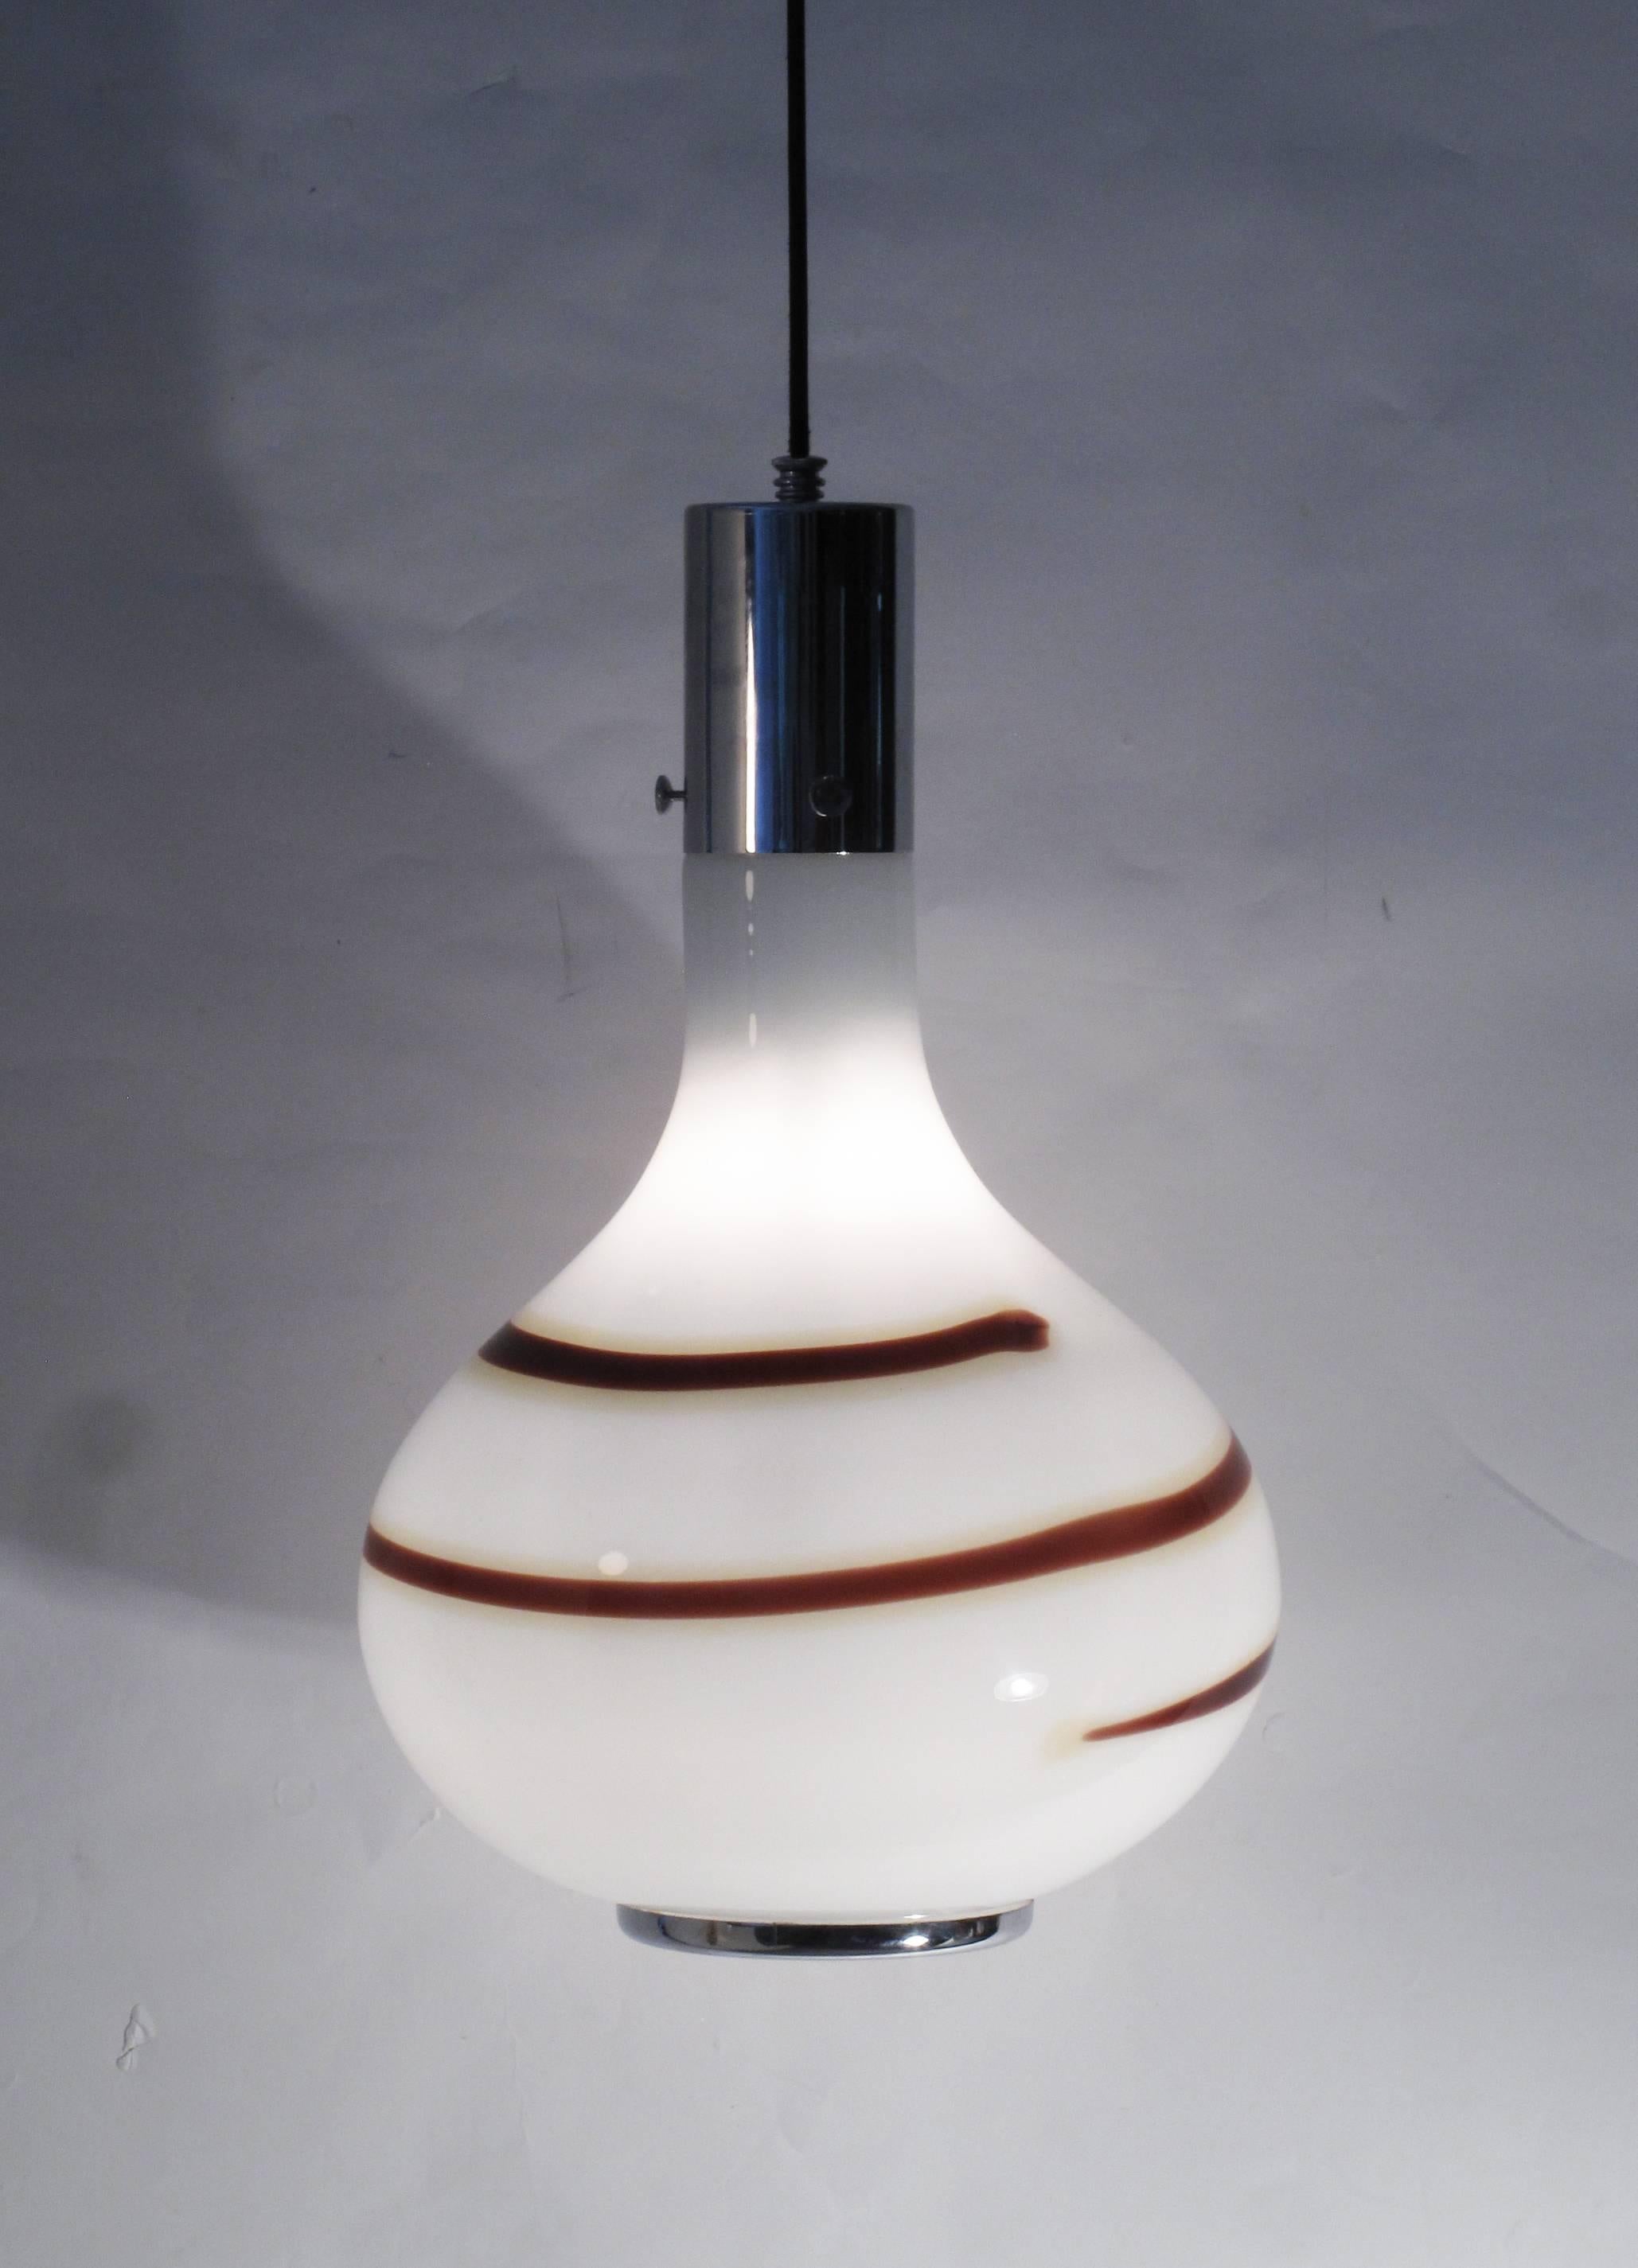 Pendant lamp made of white blown glass and carmel color line following the shape of the shade, the edge of it is finished with a steel chromed ring and top is suspended from a steel chroped cylinder.